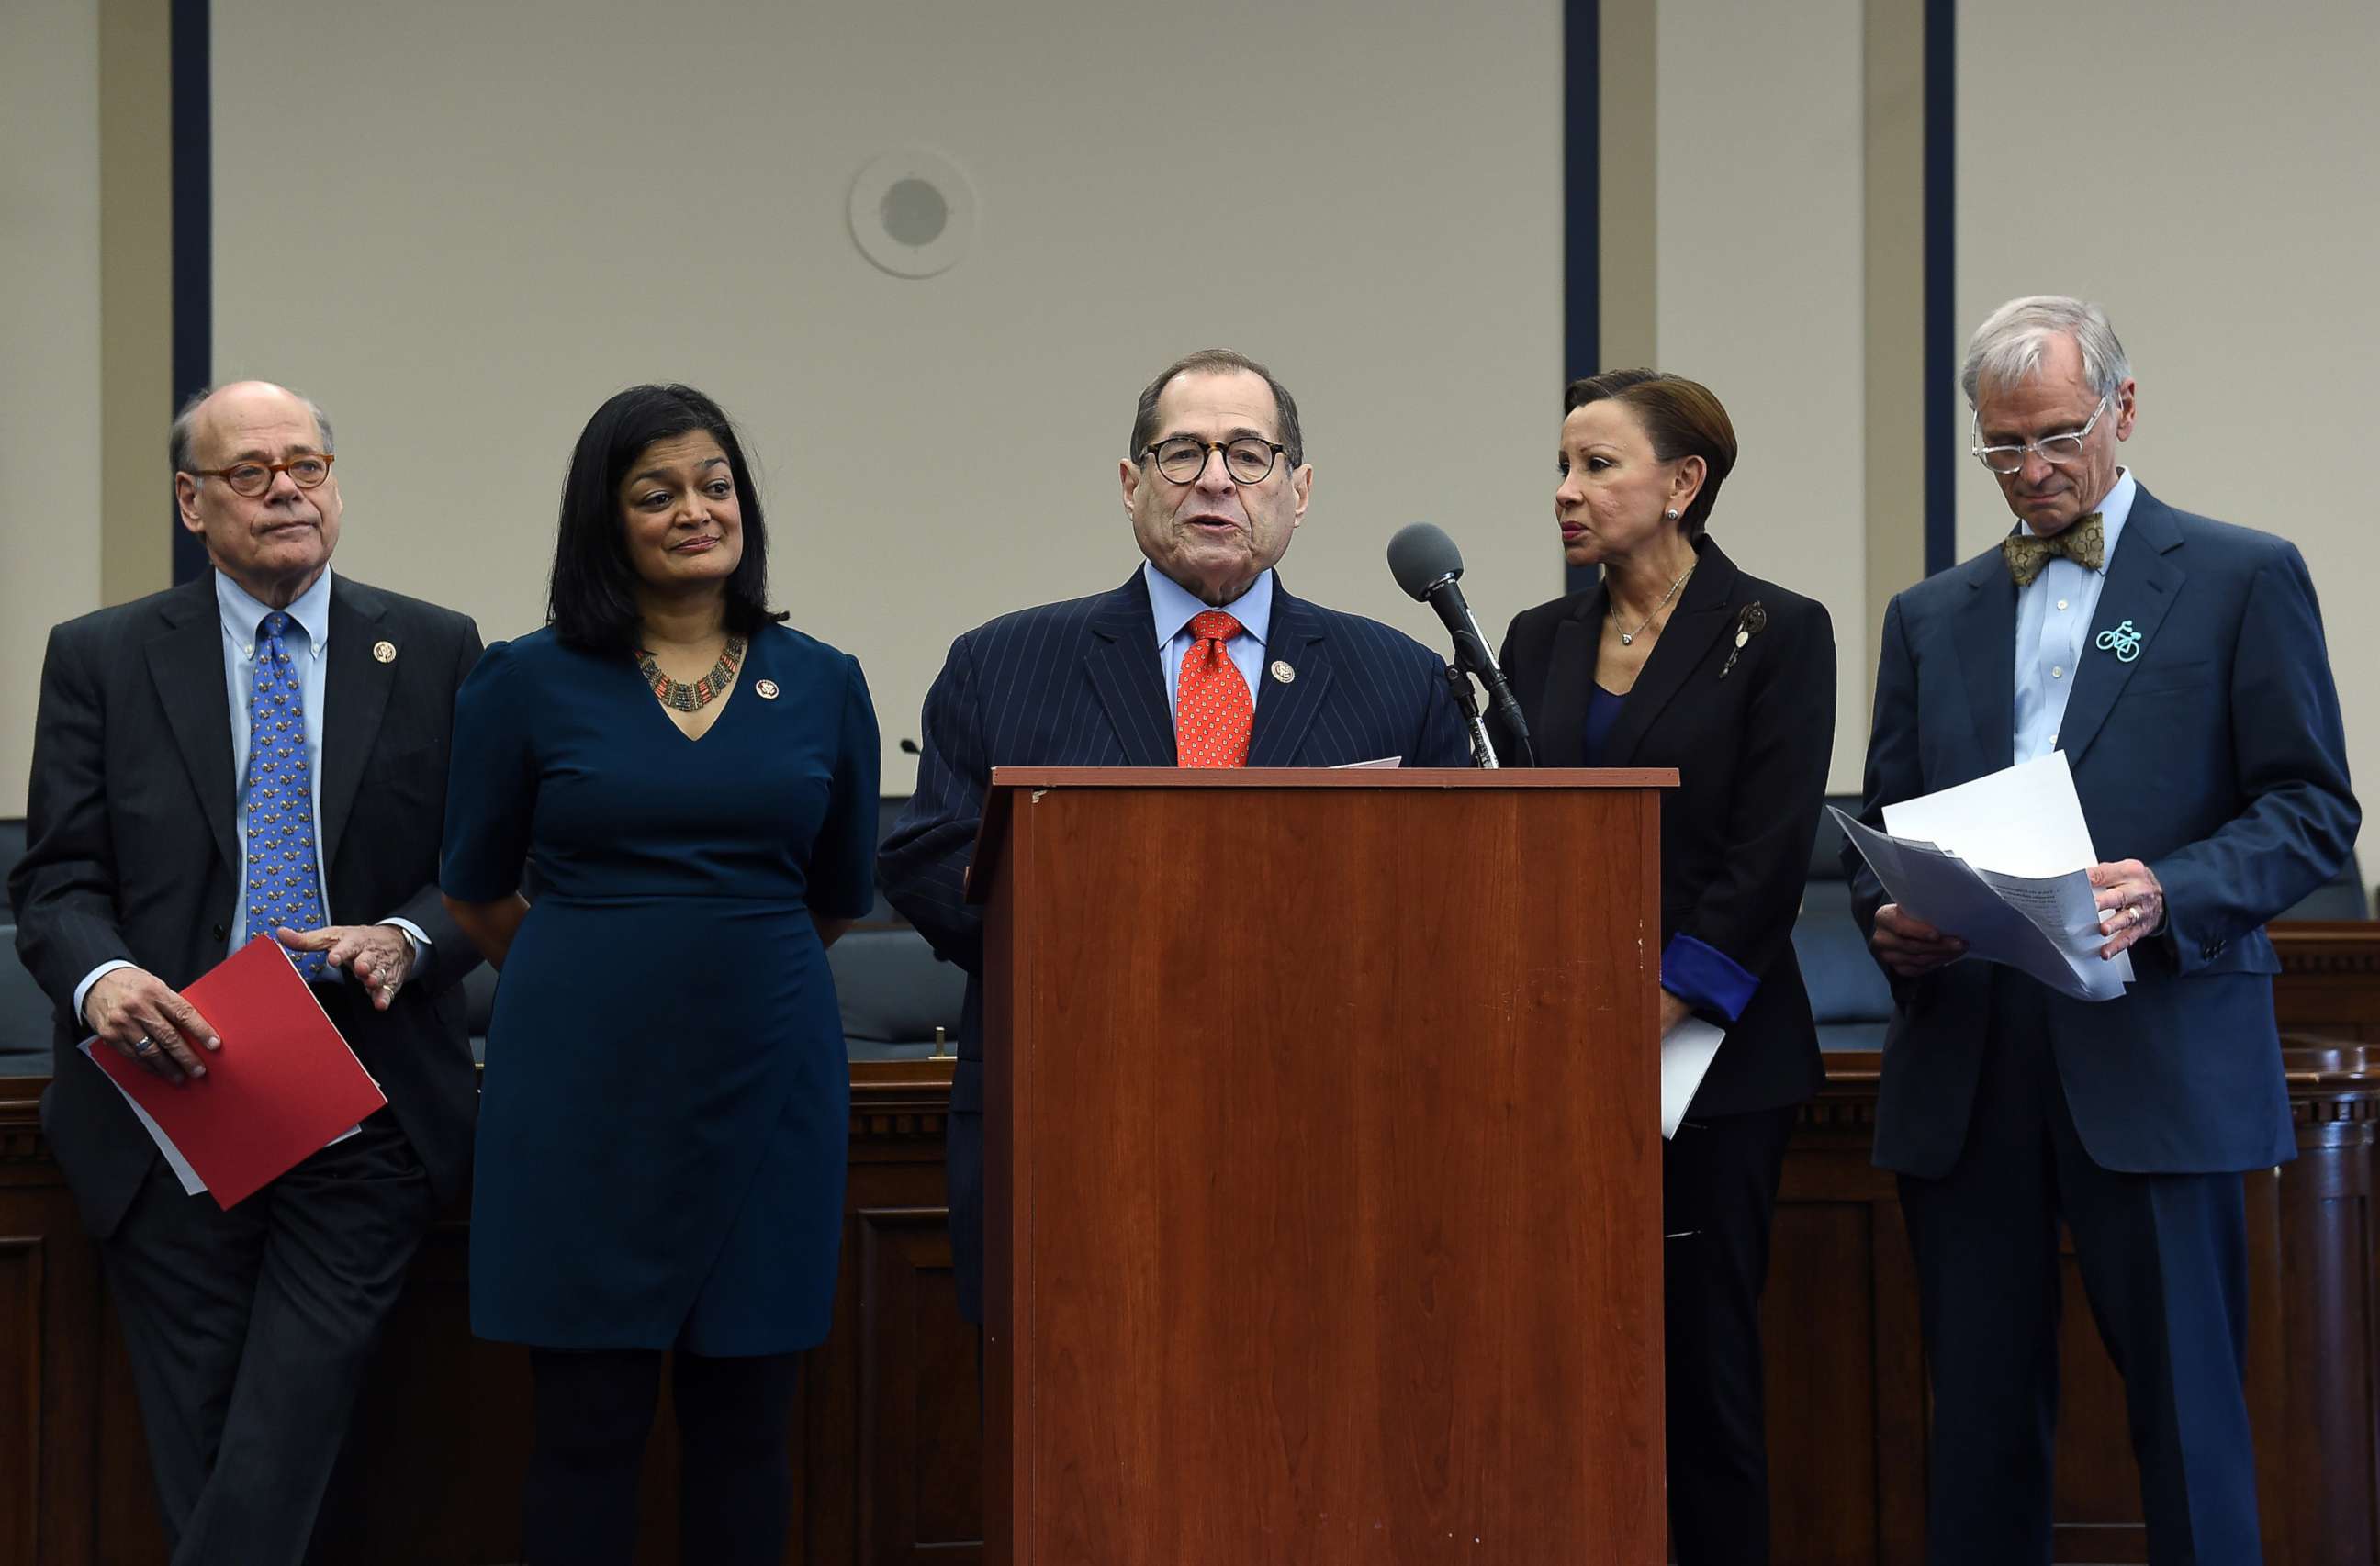 PHOTO: House Judiciary Committee Chairman Jerrold Nadler speaks during a news conference on Capitol Hill to highlight the MORE Act (Marijuana Opportunity Reinvestment and Expungement Act) legislation in Washington, DC, Nov. 19, 2019.